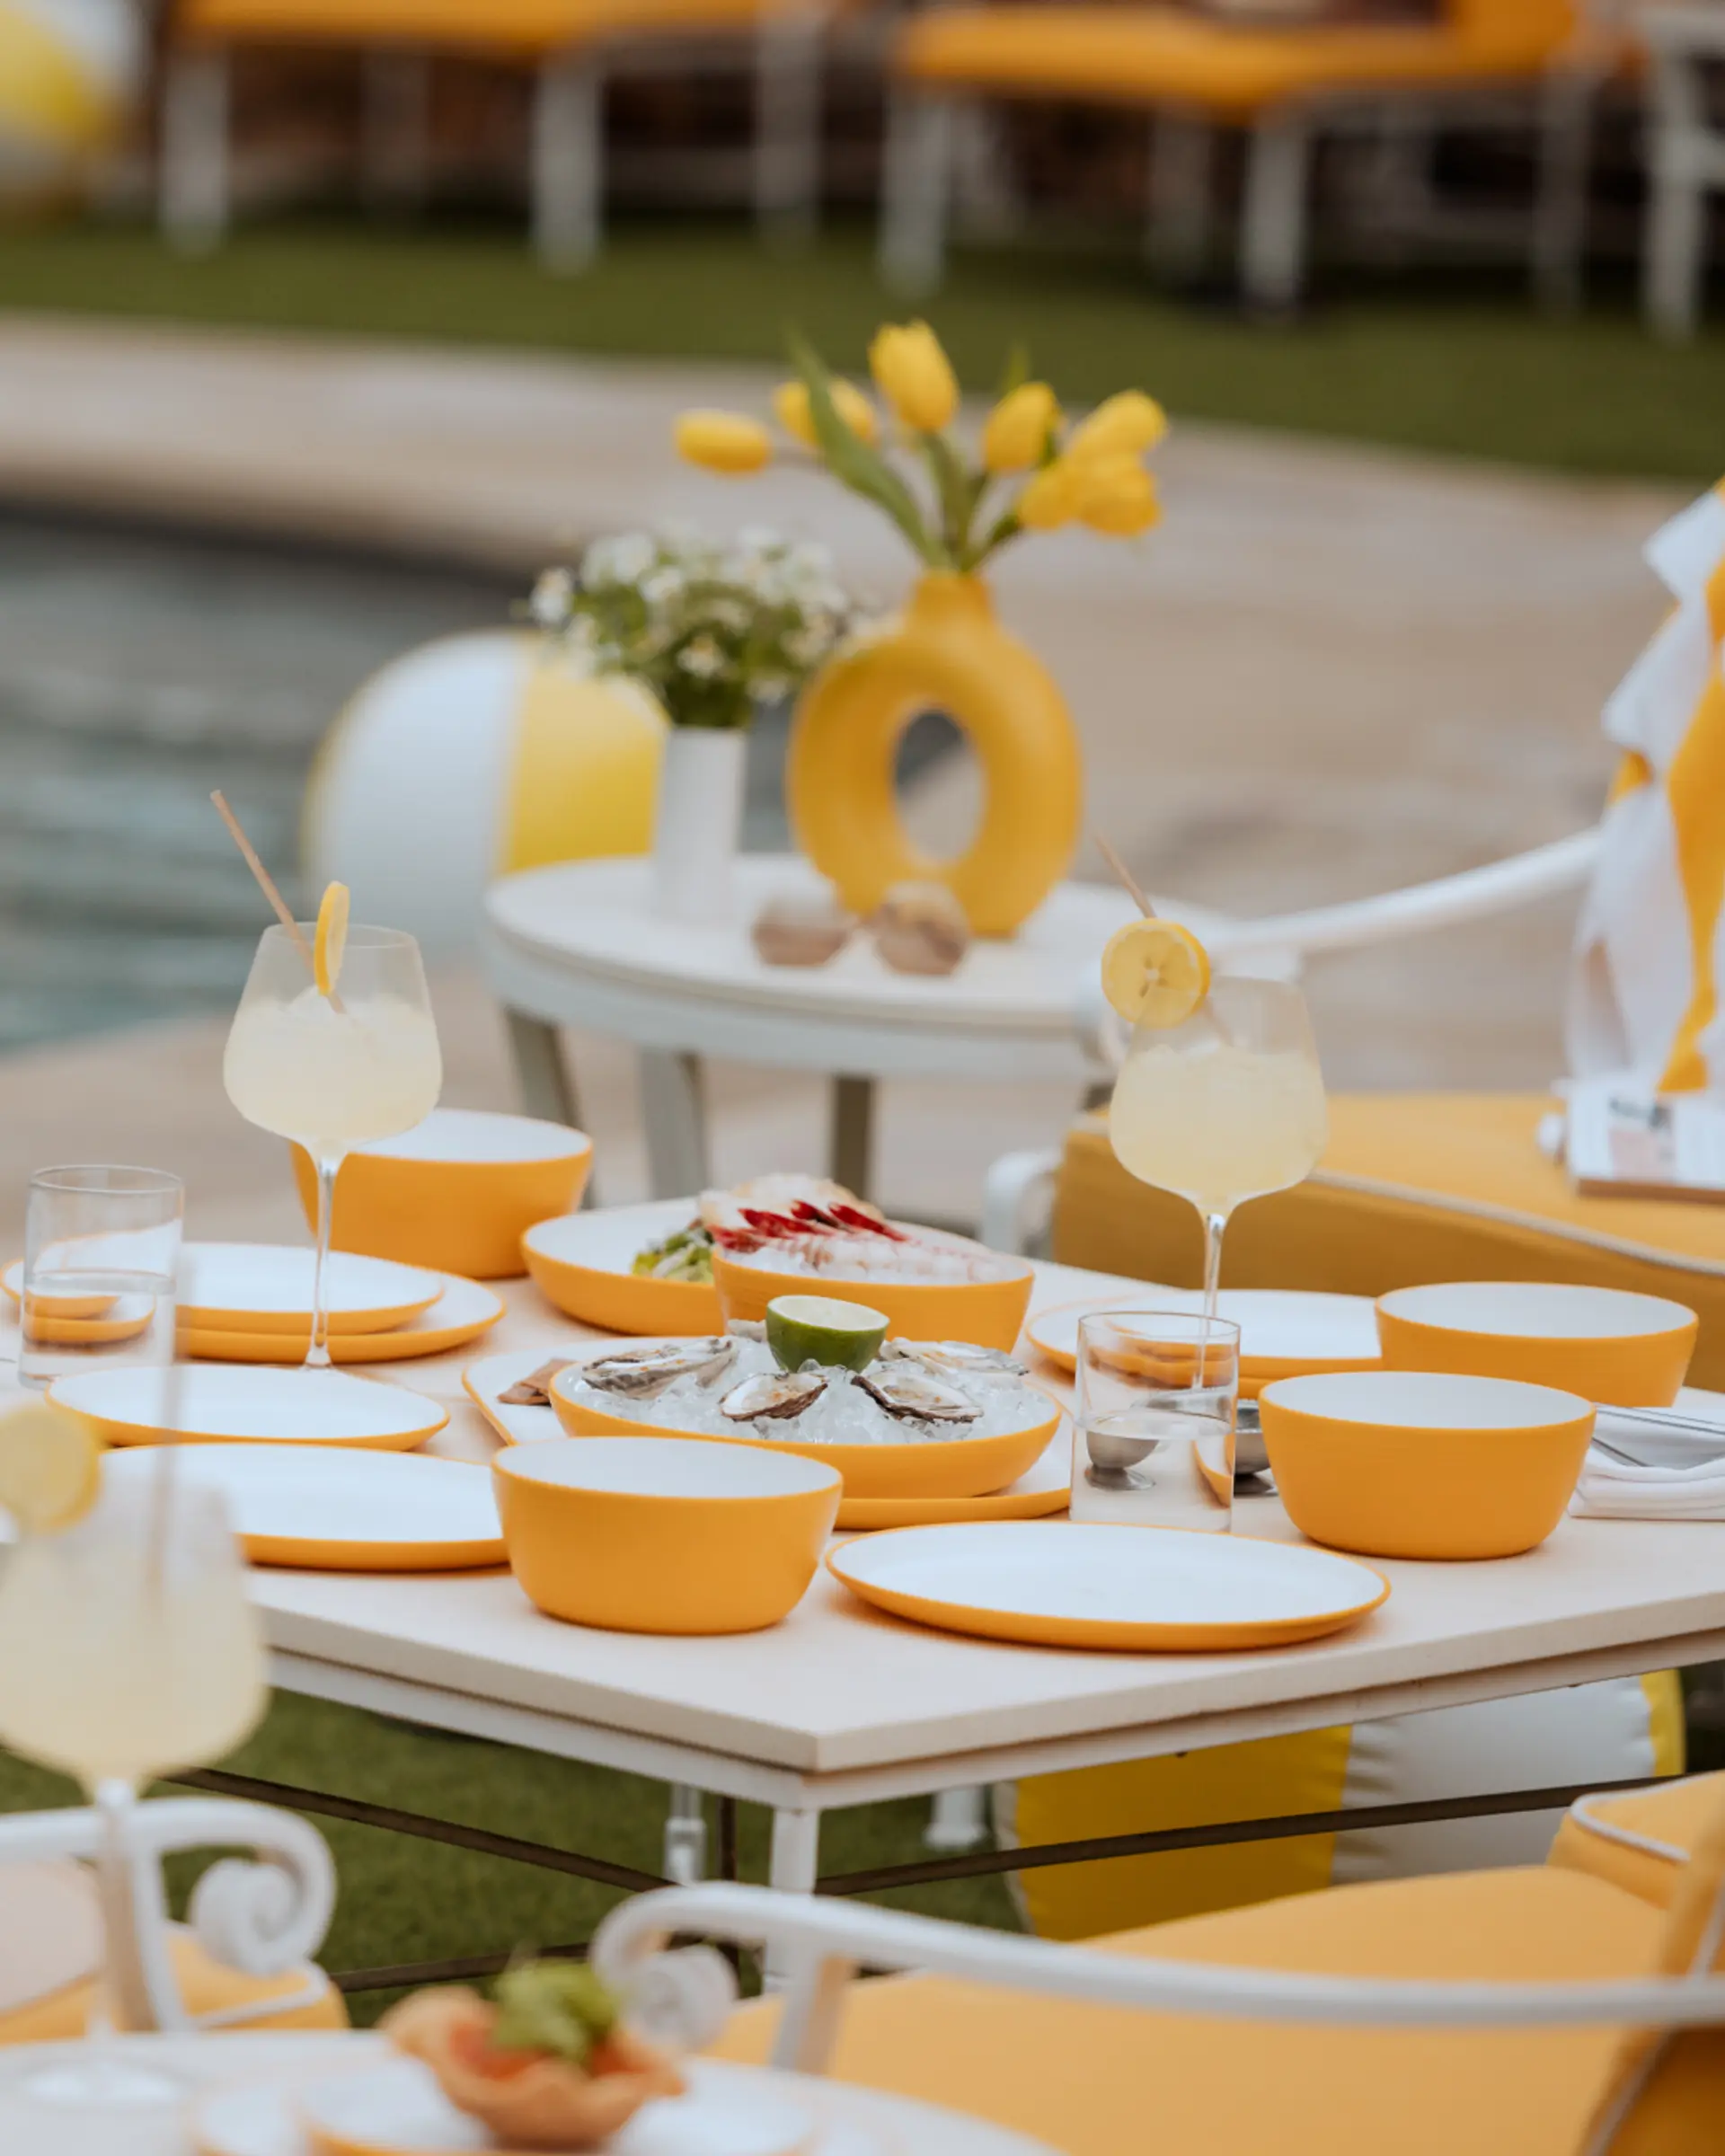 A neatly arranged outdoor dining table features a yellow color theme with matching dishes, glasses, and decorative elements.